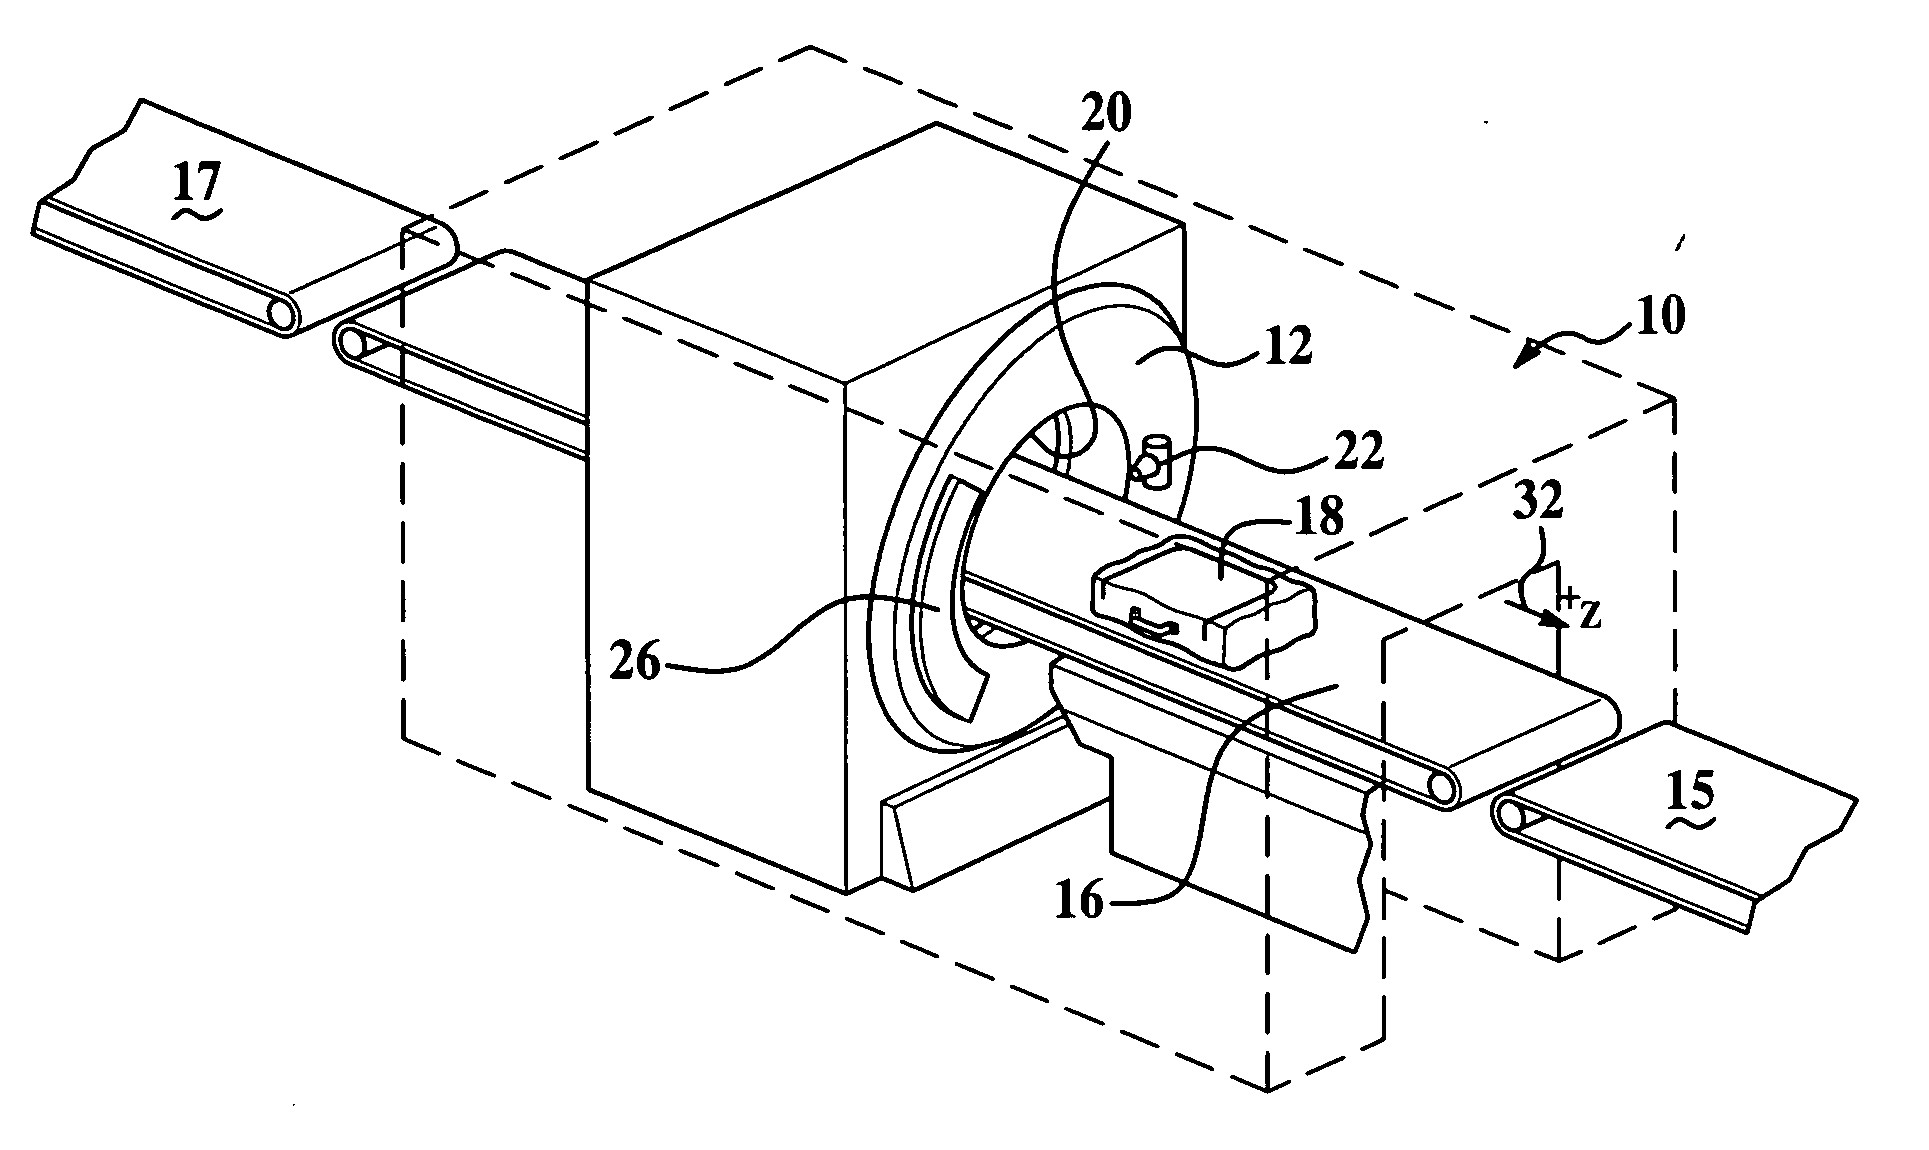 Apparatus and method for controlling start and stop operations of a computed tomography imaging system